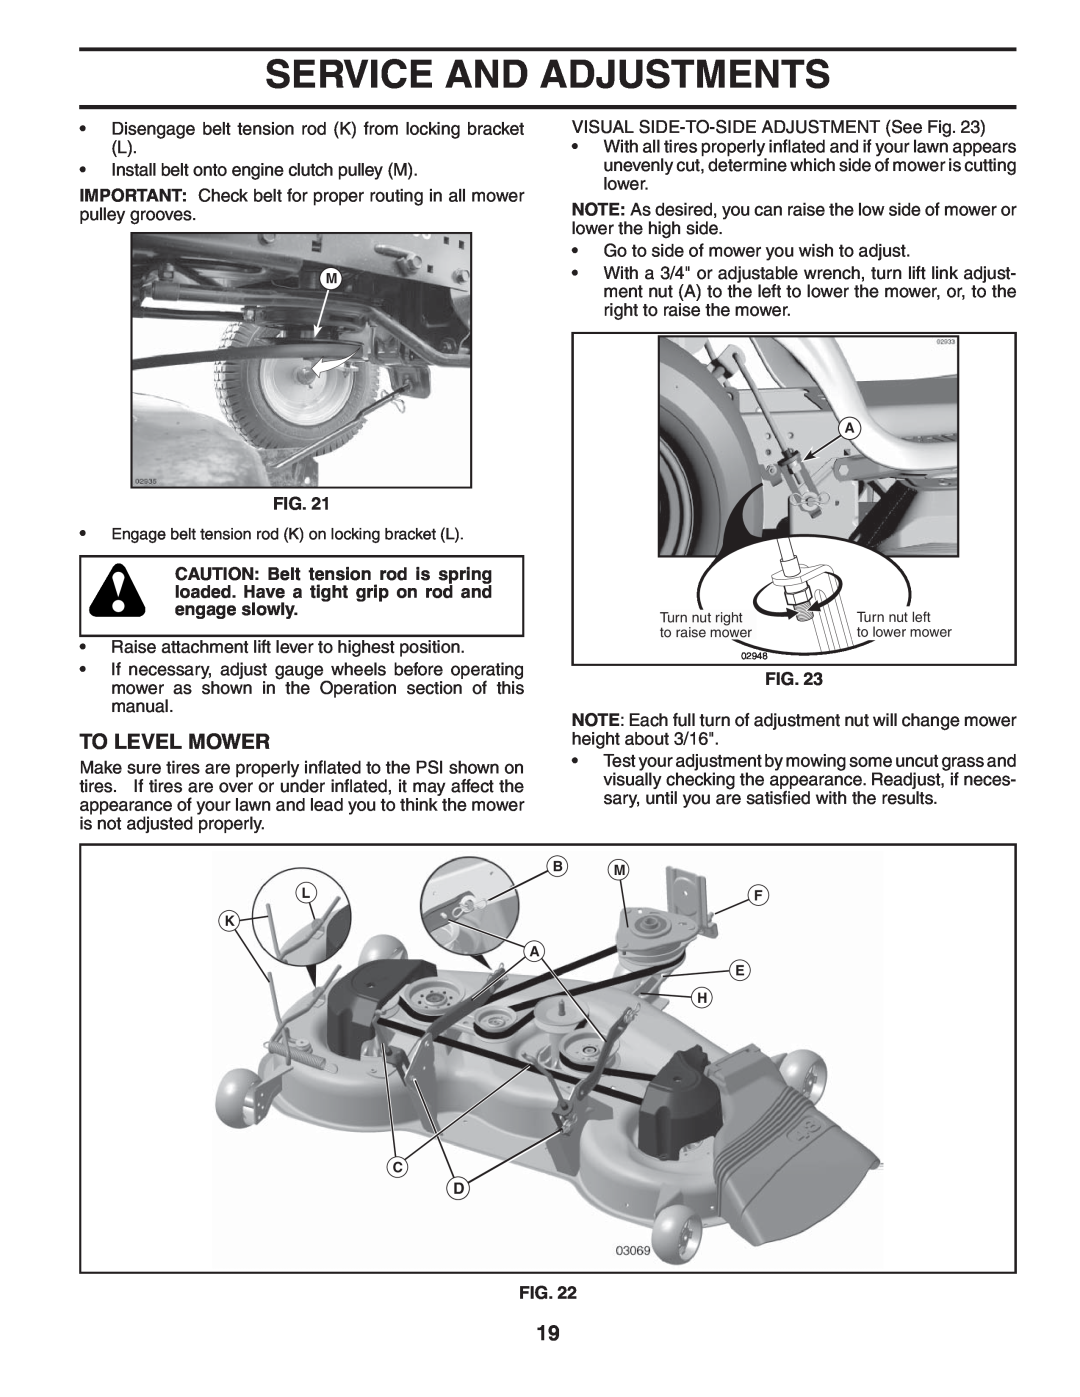 Husqvarna YTH2348 owner manual To Level Mower, Service And Adjustments, Fig 